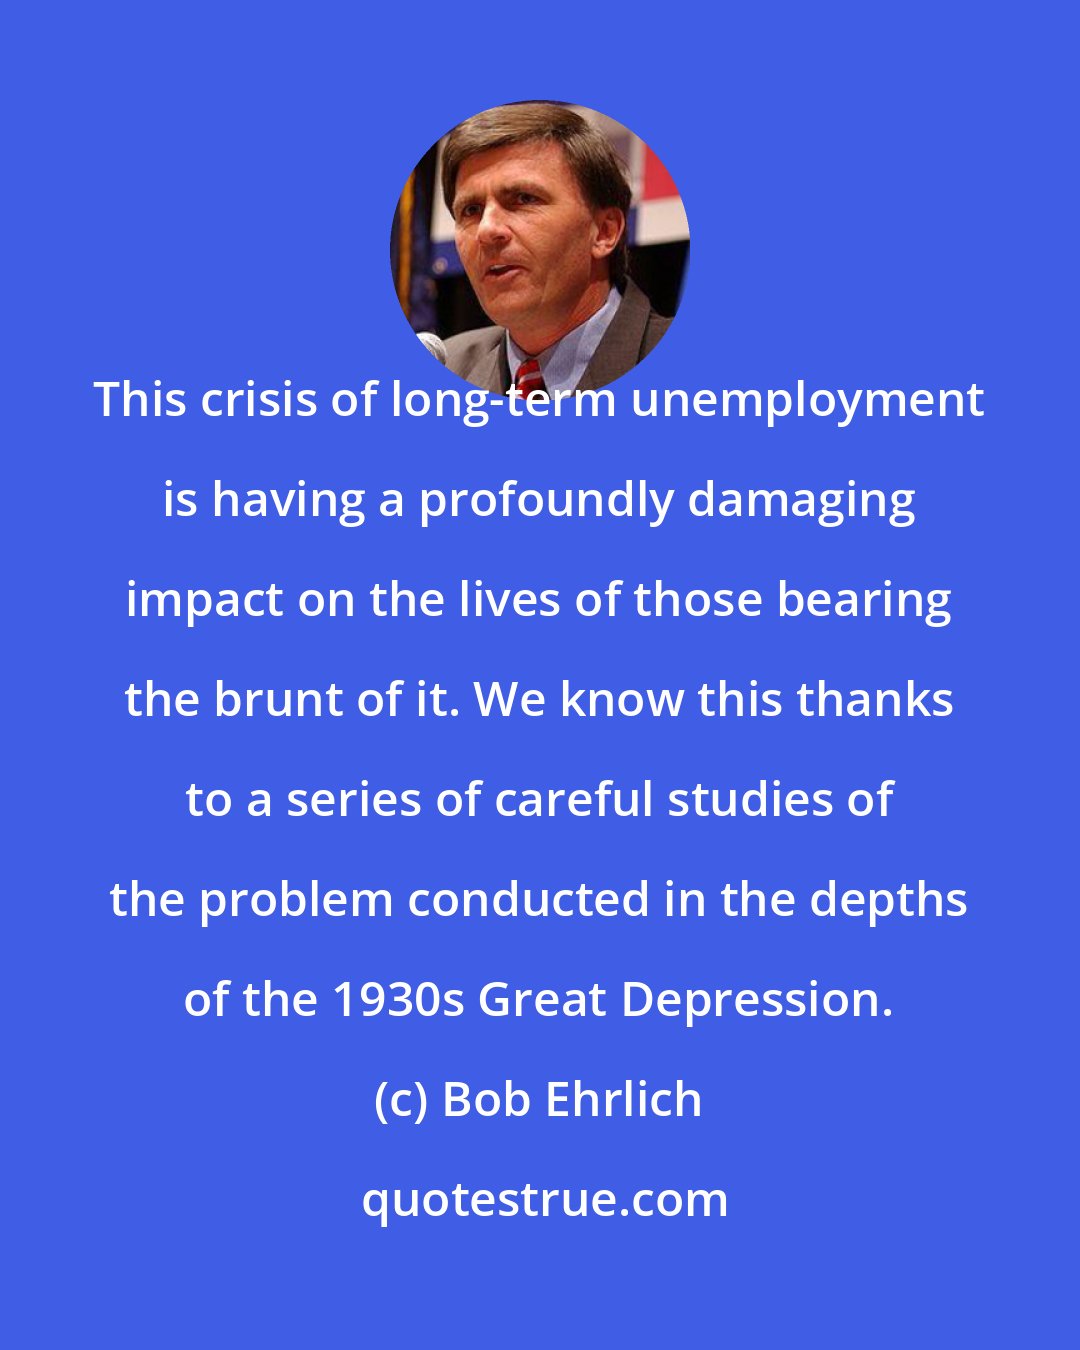 Bob Ehrlich: This crisis of long-term unemployment is having a profoundly damaging impact on the lives of those bearing the brunt of it. We know this thanks to a series of careful studies of the problem conducted in the depths of the 1930s Great Depression.